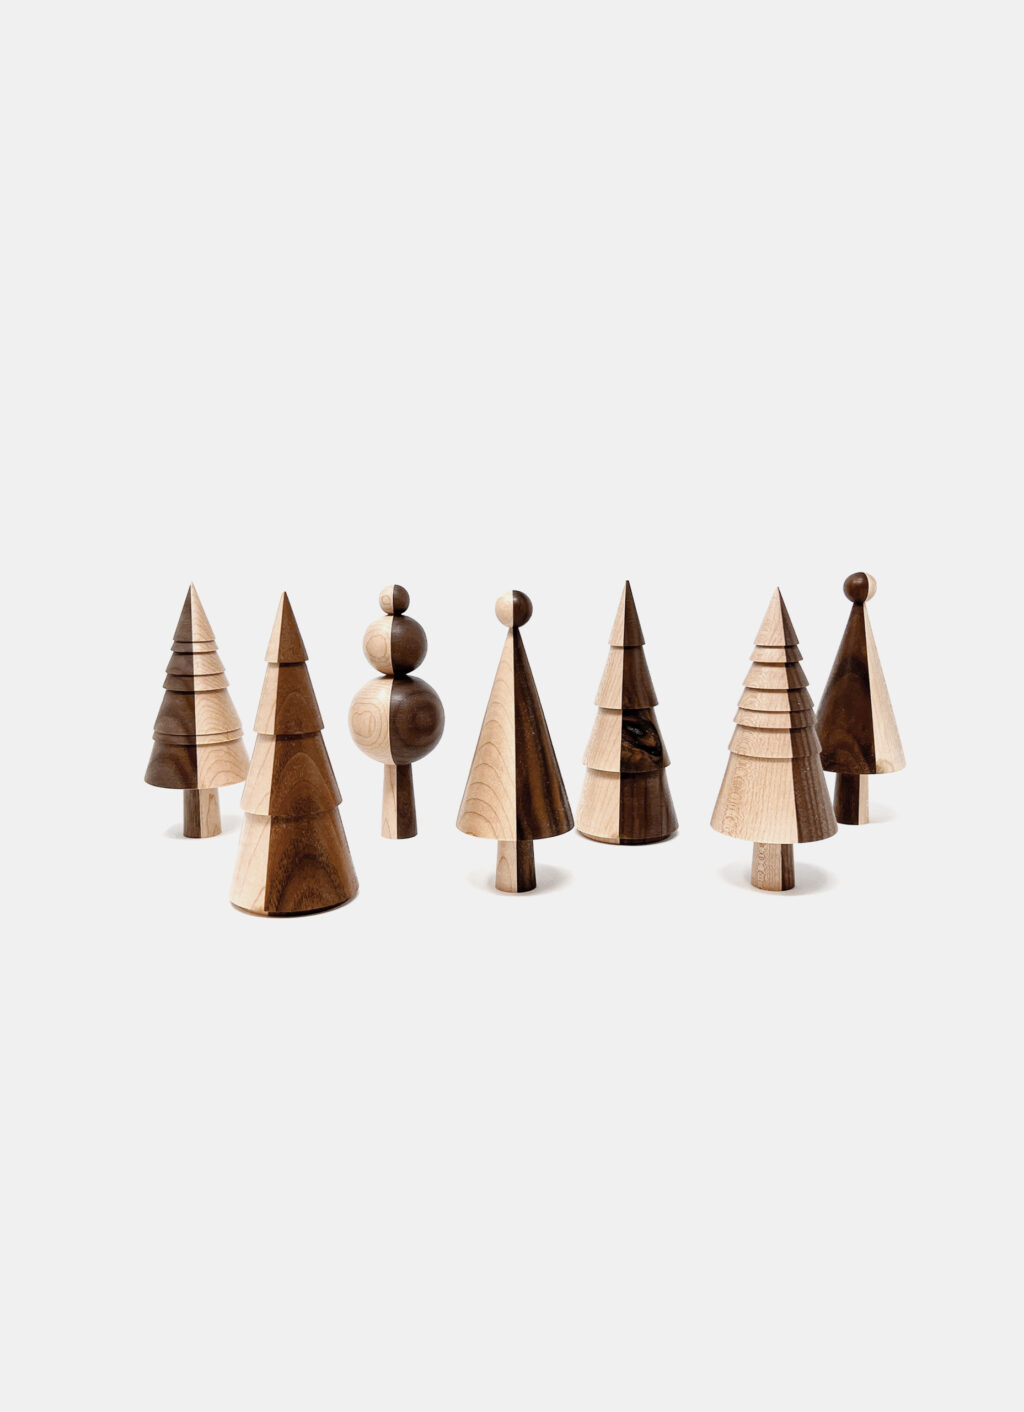 Forge Creative - The Arboretum - Handmade Wooden Tree Ornaments - diff. shapes - Two Tone Edition